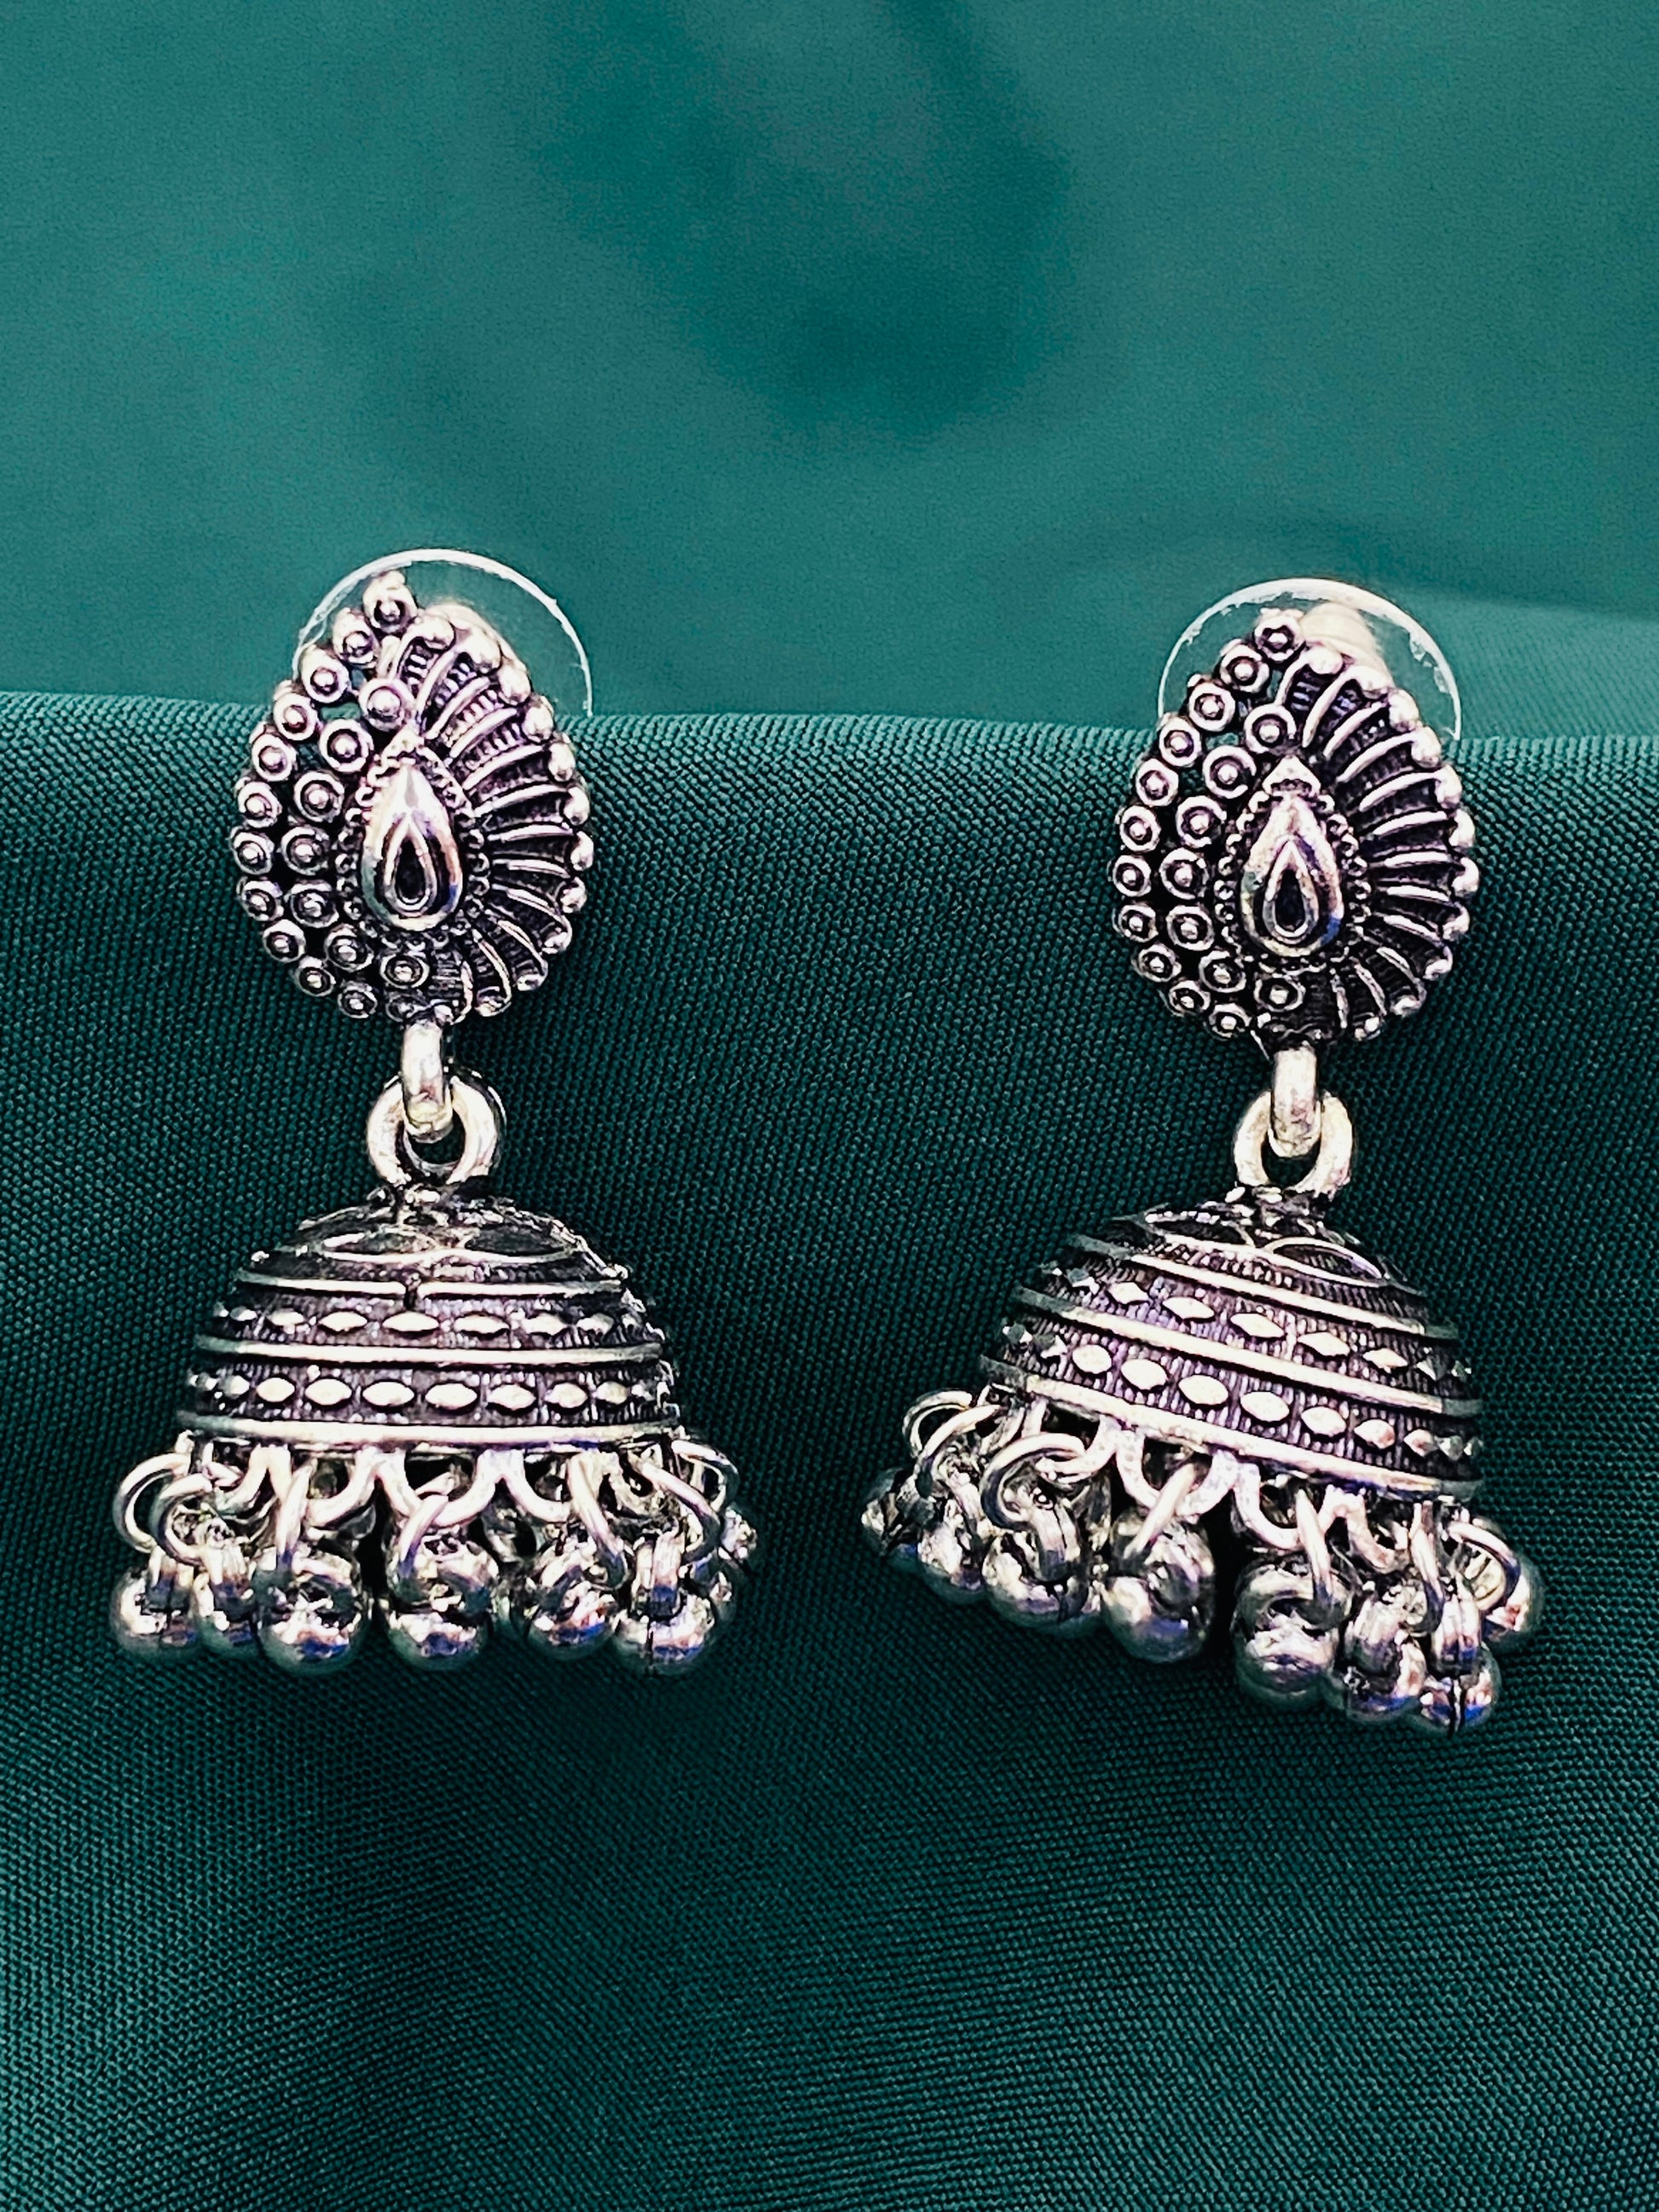  Jhumka Earrings With Beads In Tempe